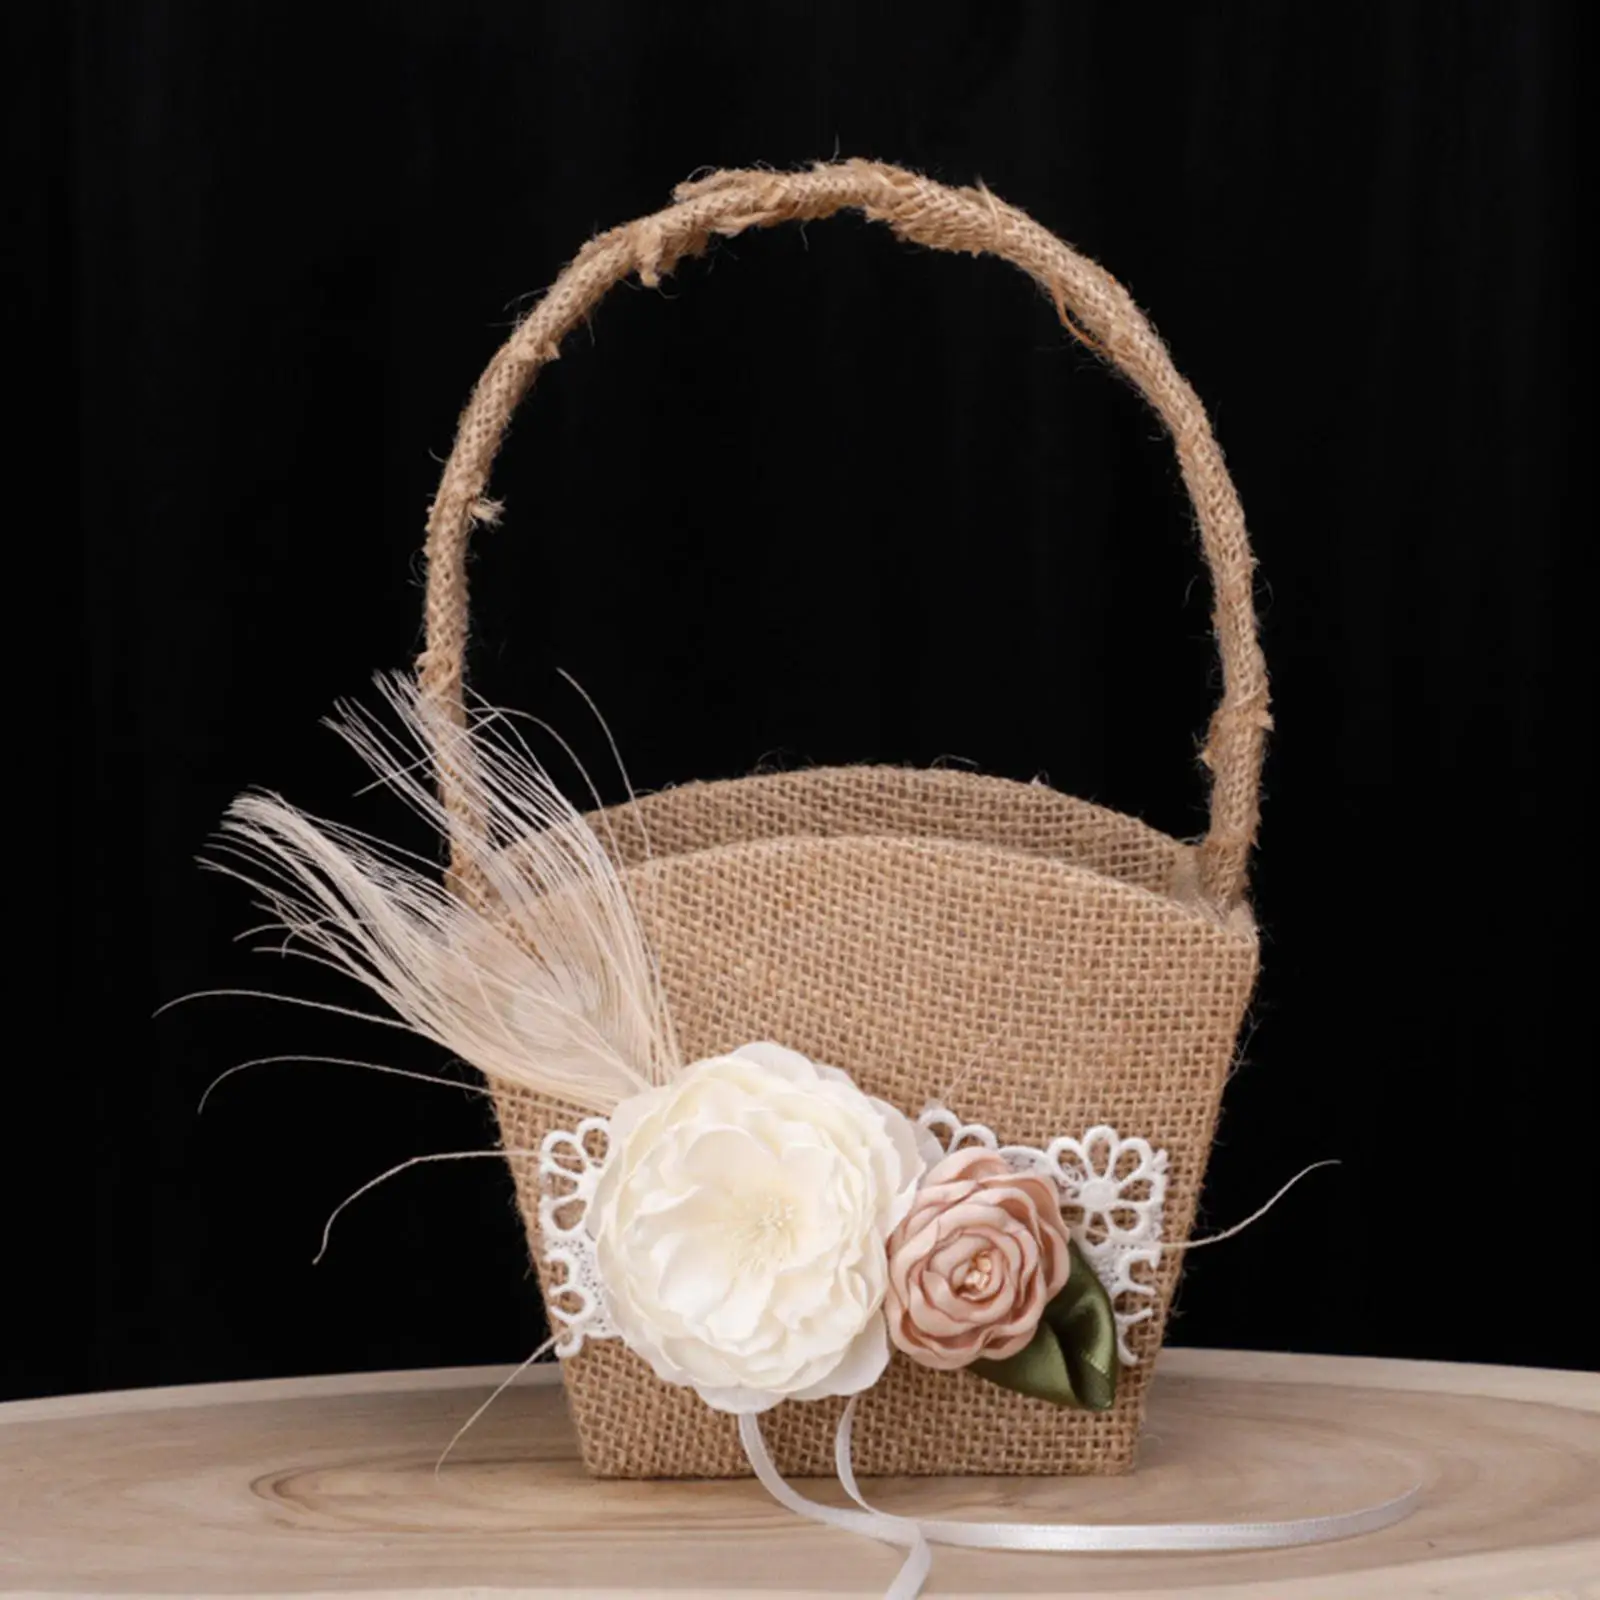 Multi Use Flower Girl Basket Accessory Rose Shaped Decor Celebration Rustic Candy Gift Basket Lace Satin Burlap for Home Parties